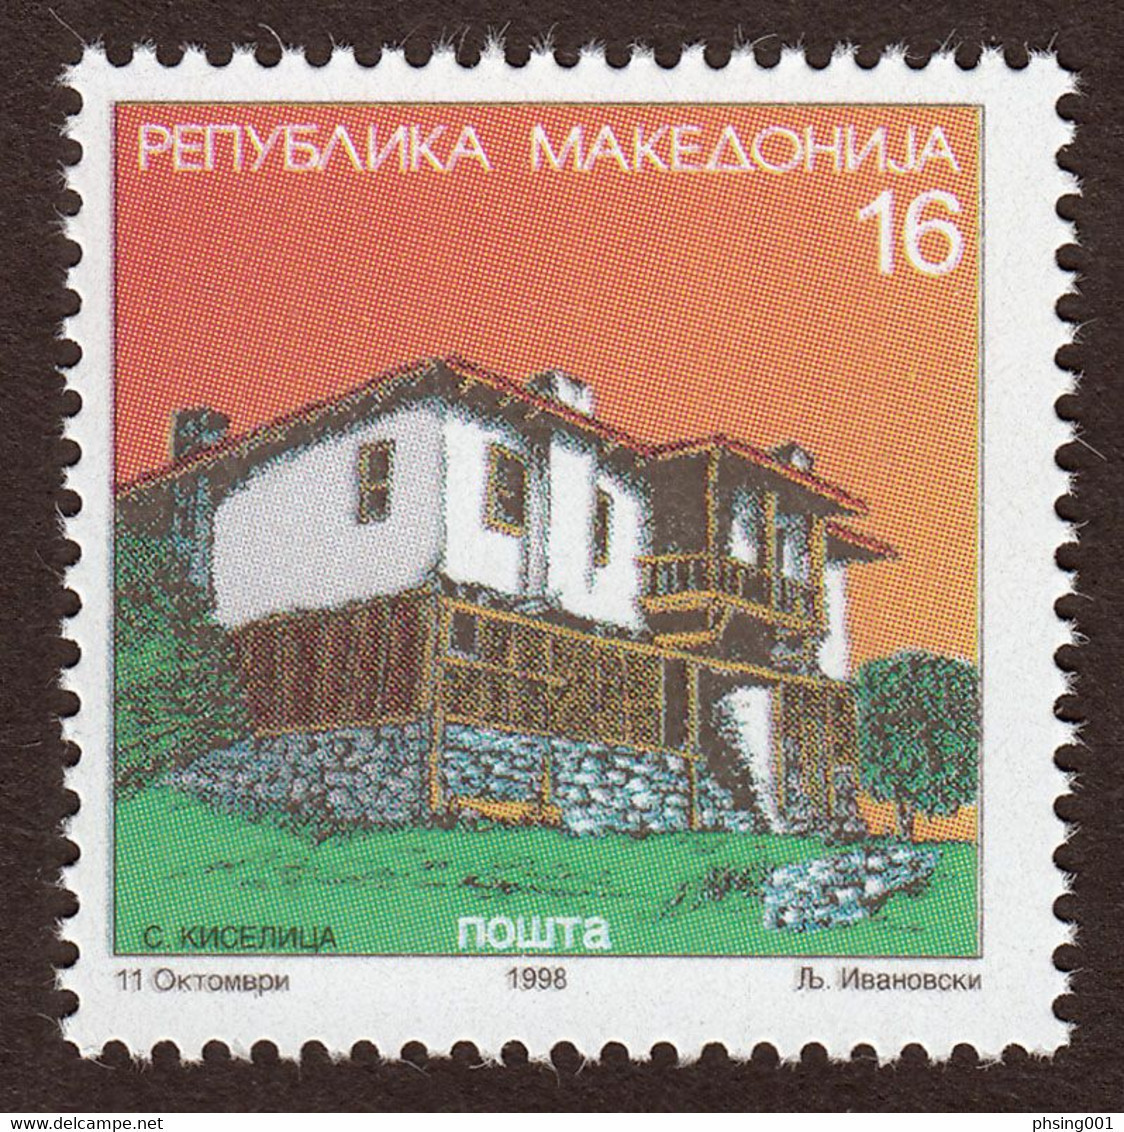 Macedonia 1998 Architecture Villages Houses Kiselica, Definitive Stamp MNH - Nordmazedonien